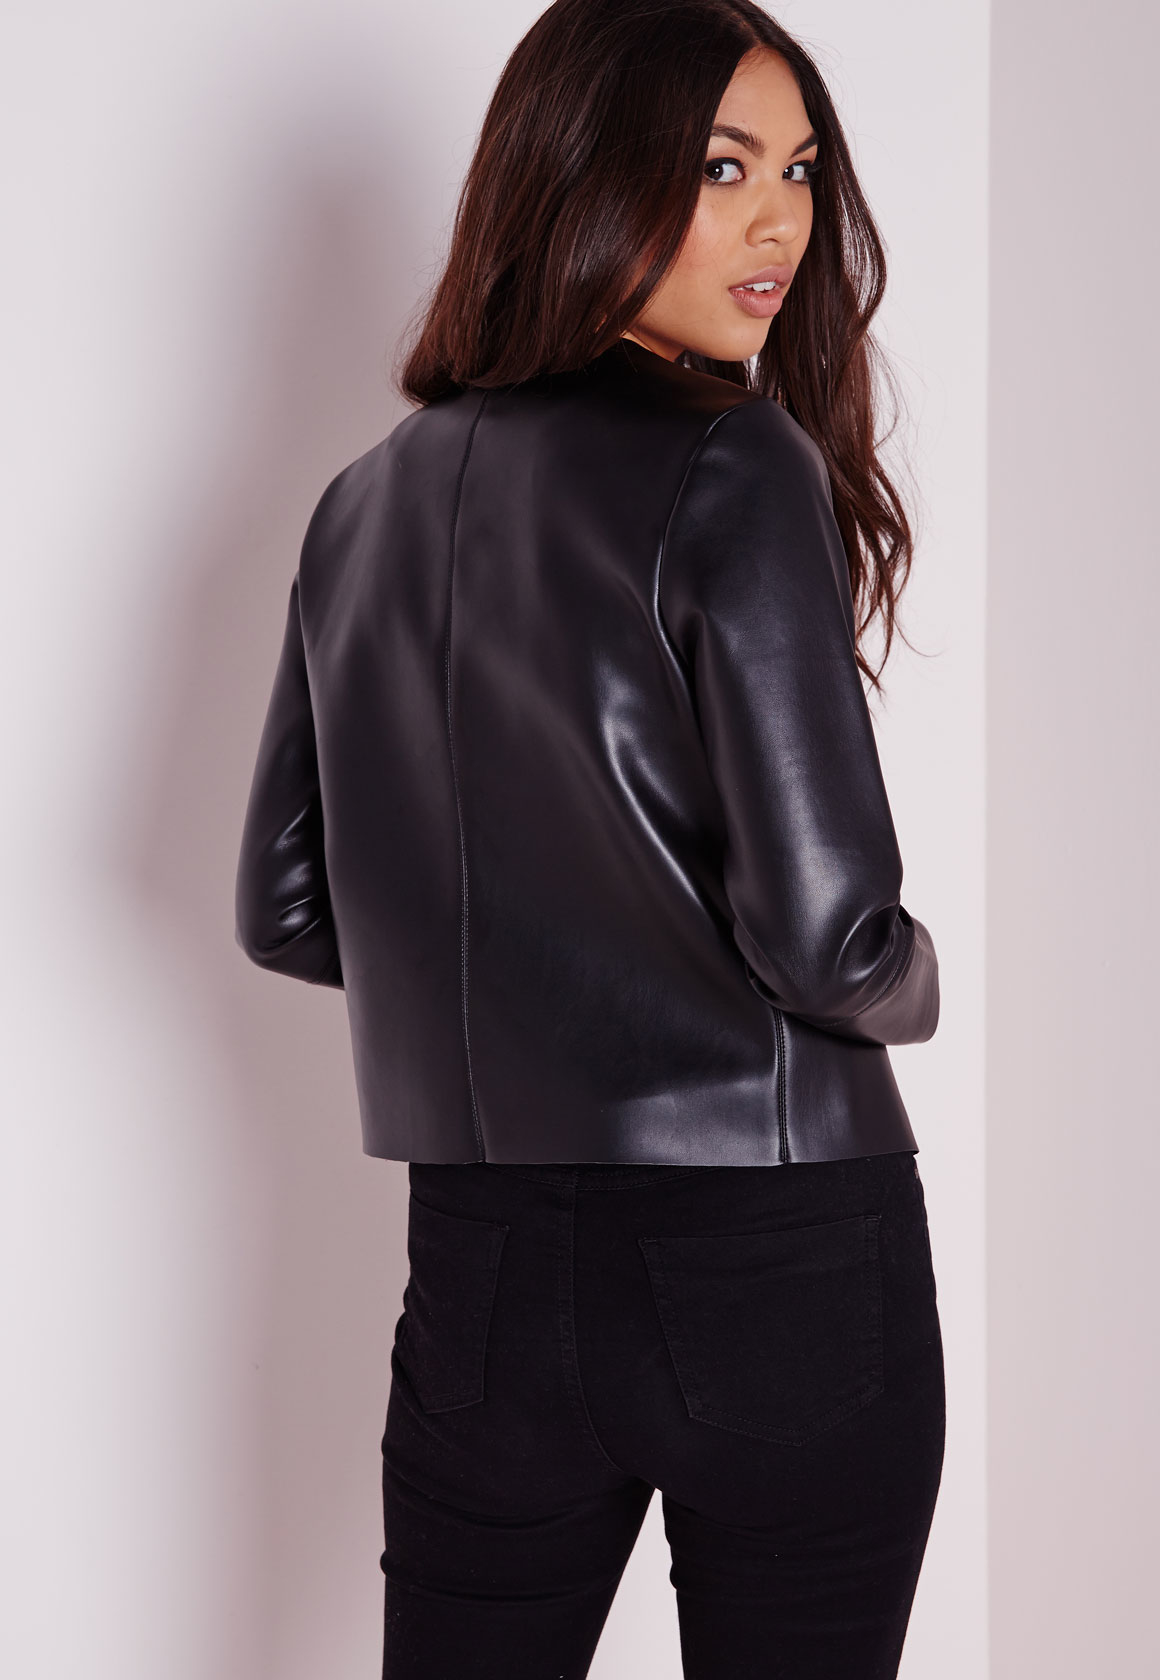 Lyst - Missguided Collarless Faux Leather Jacket Black in Black